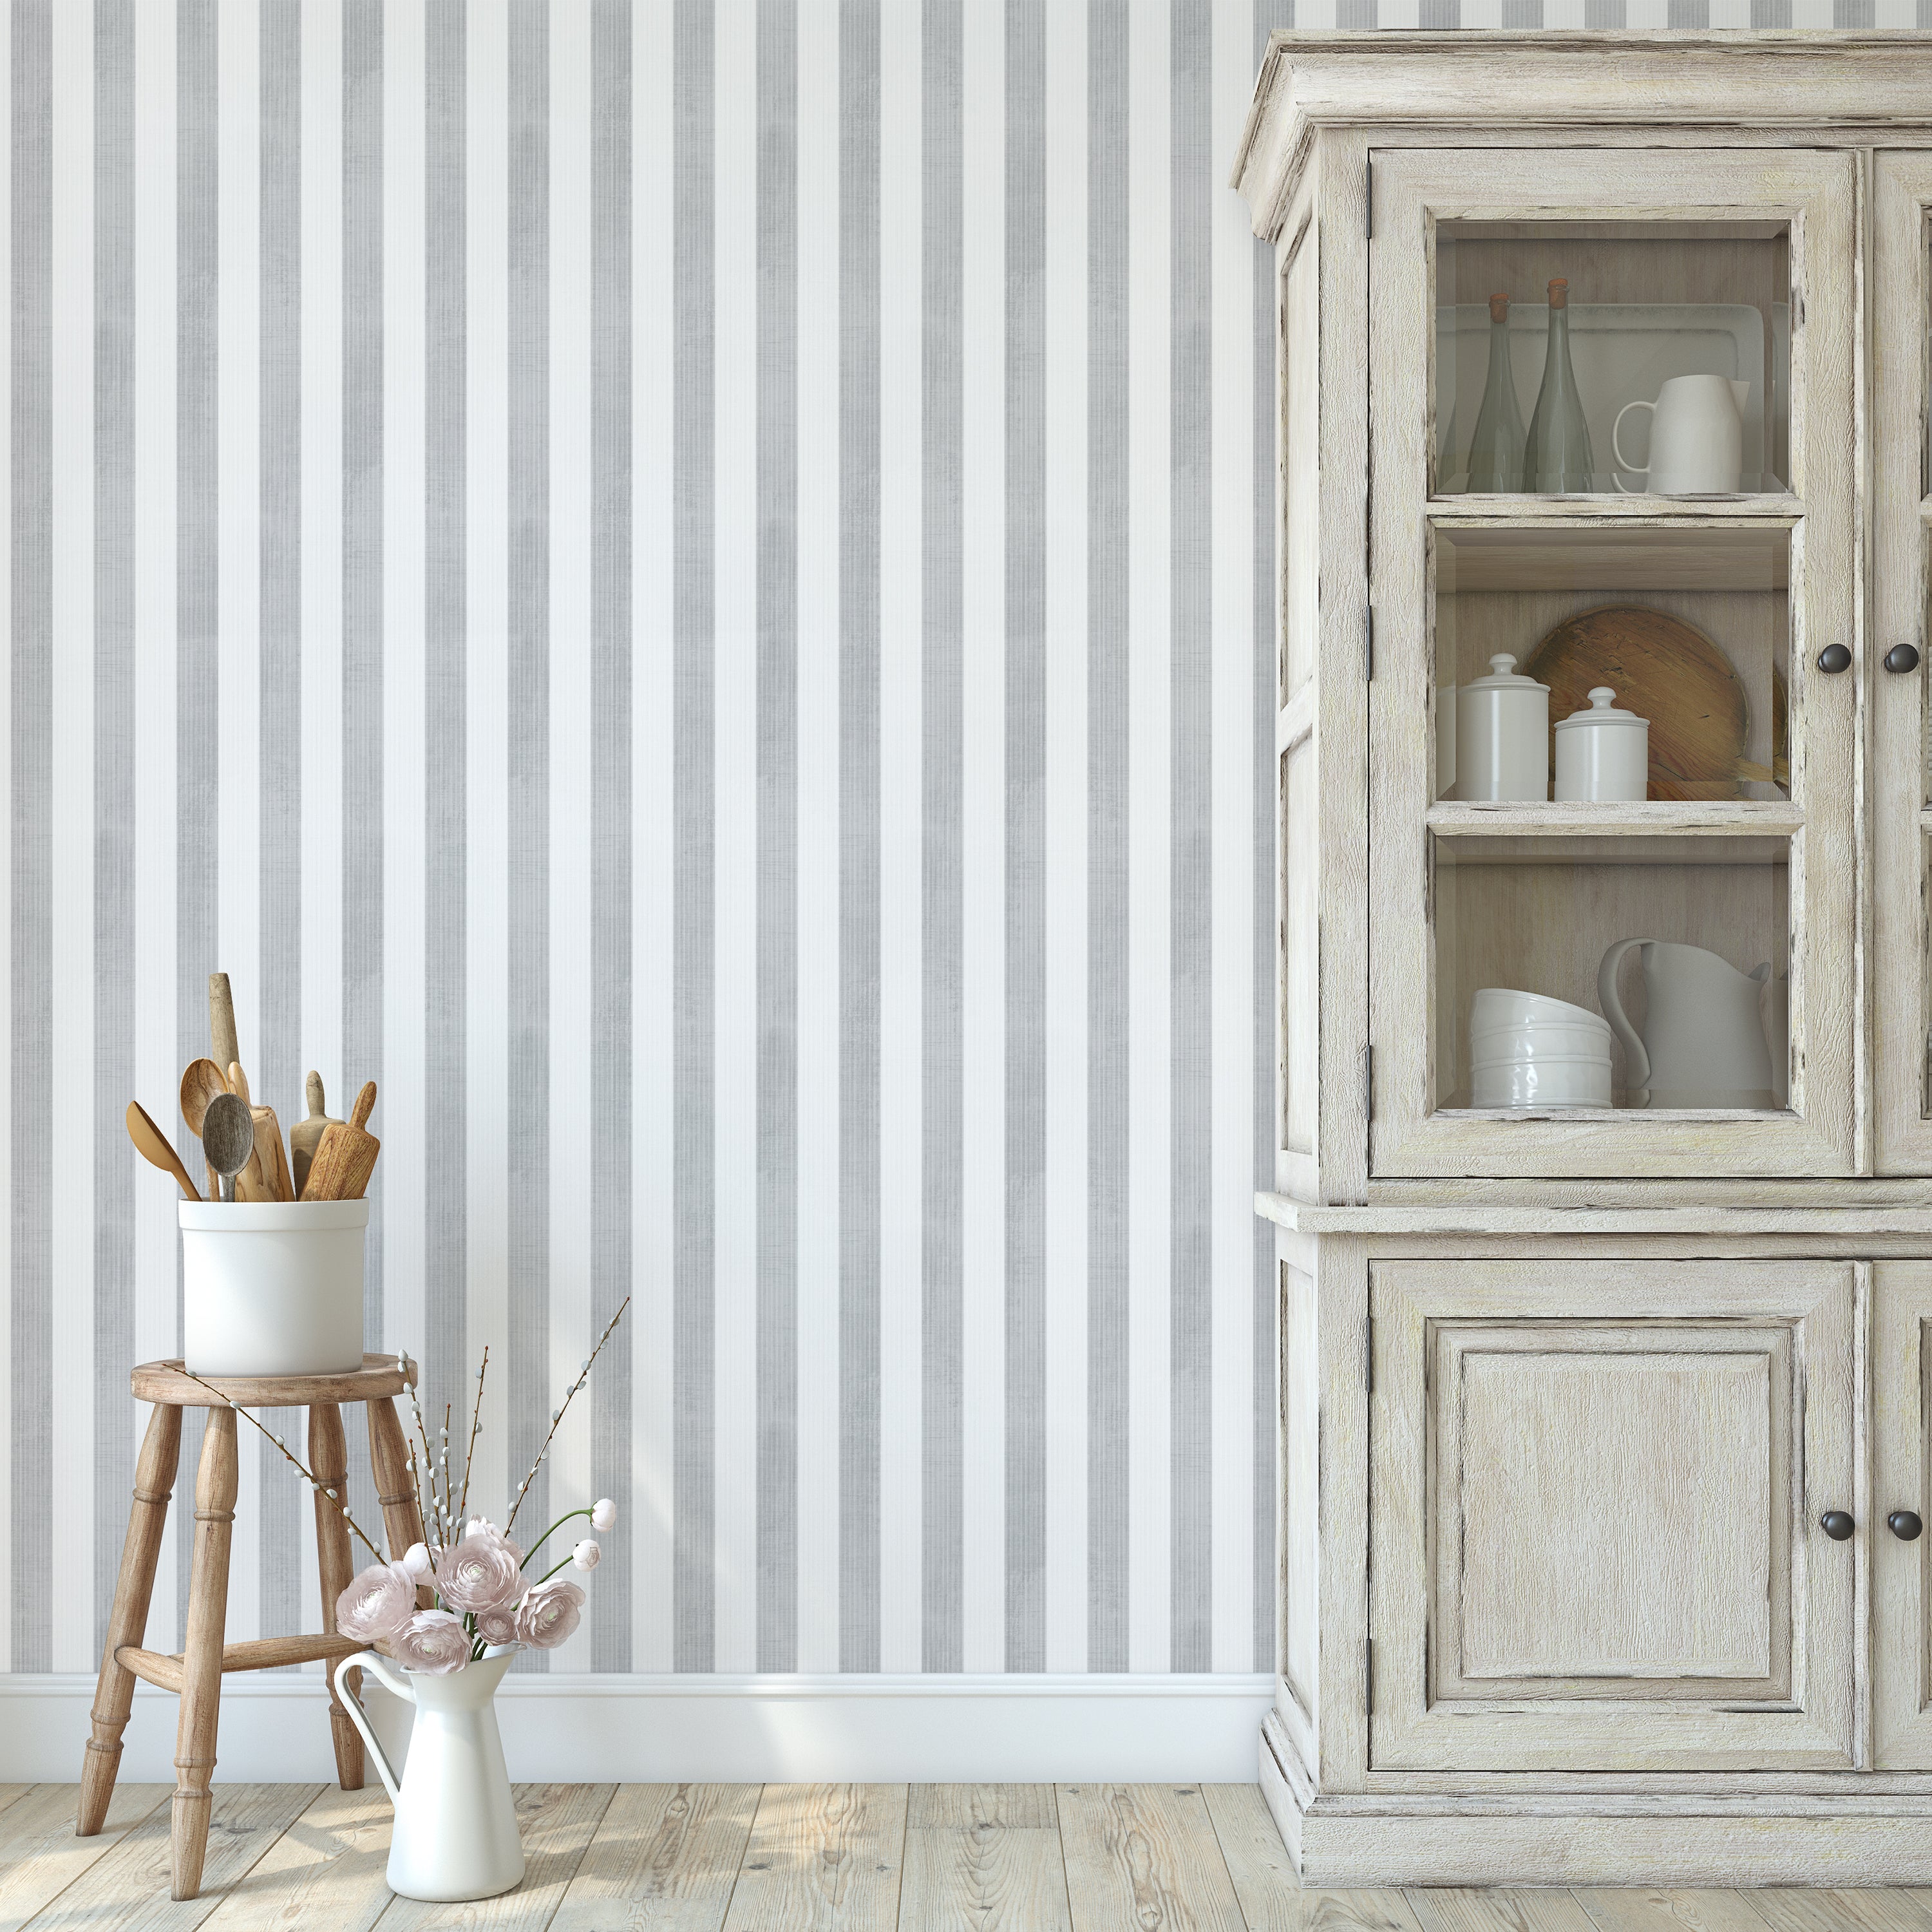 Gabbandra Stripes Wallpaper - The 7th Haven Interiors Line from WALL BLUSH